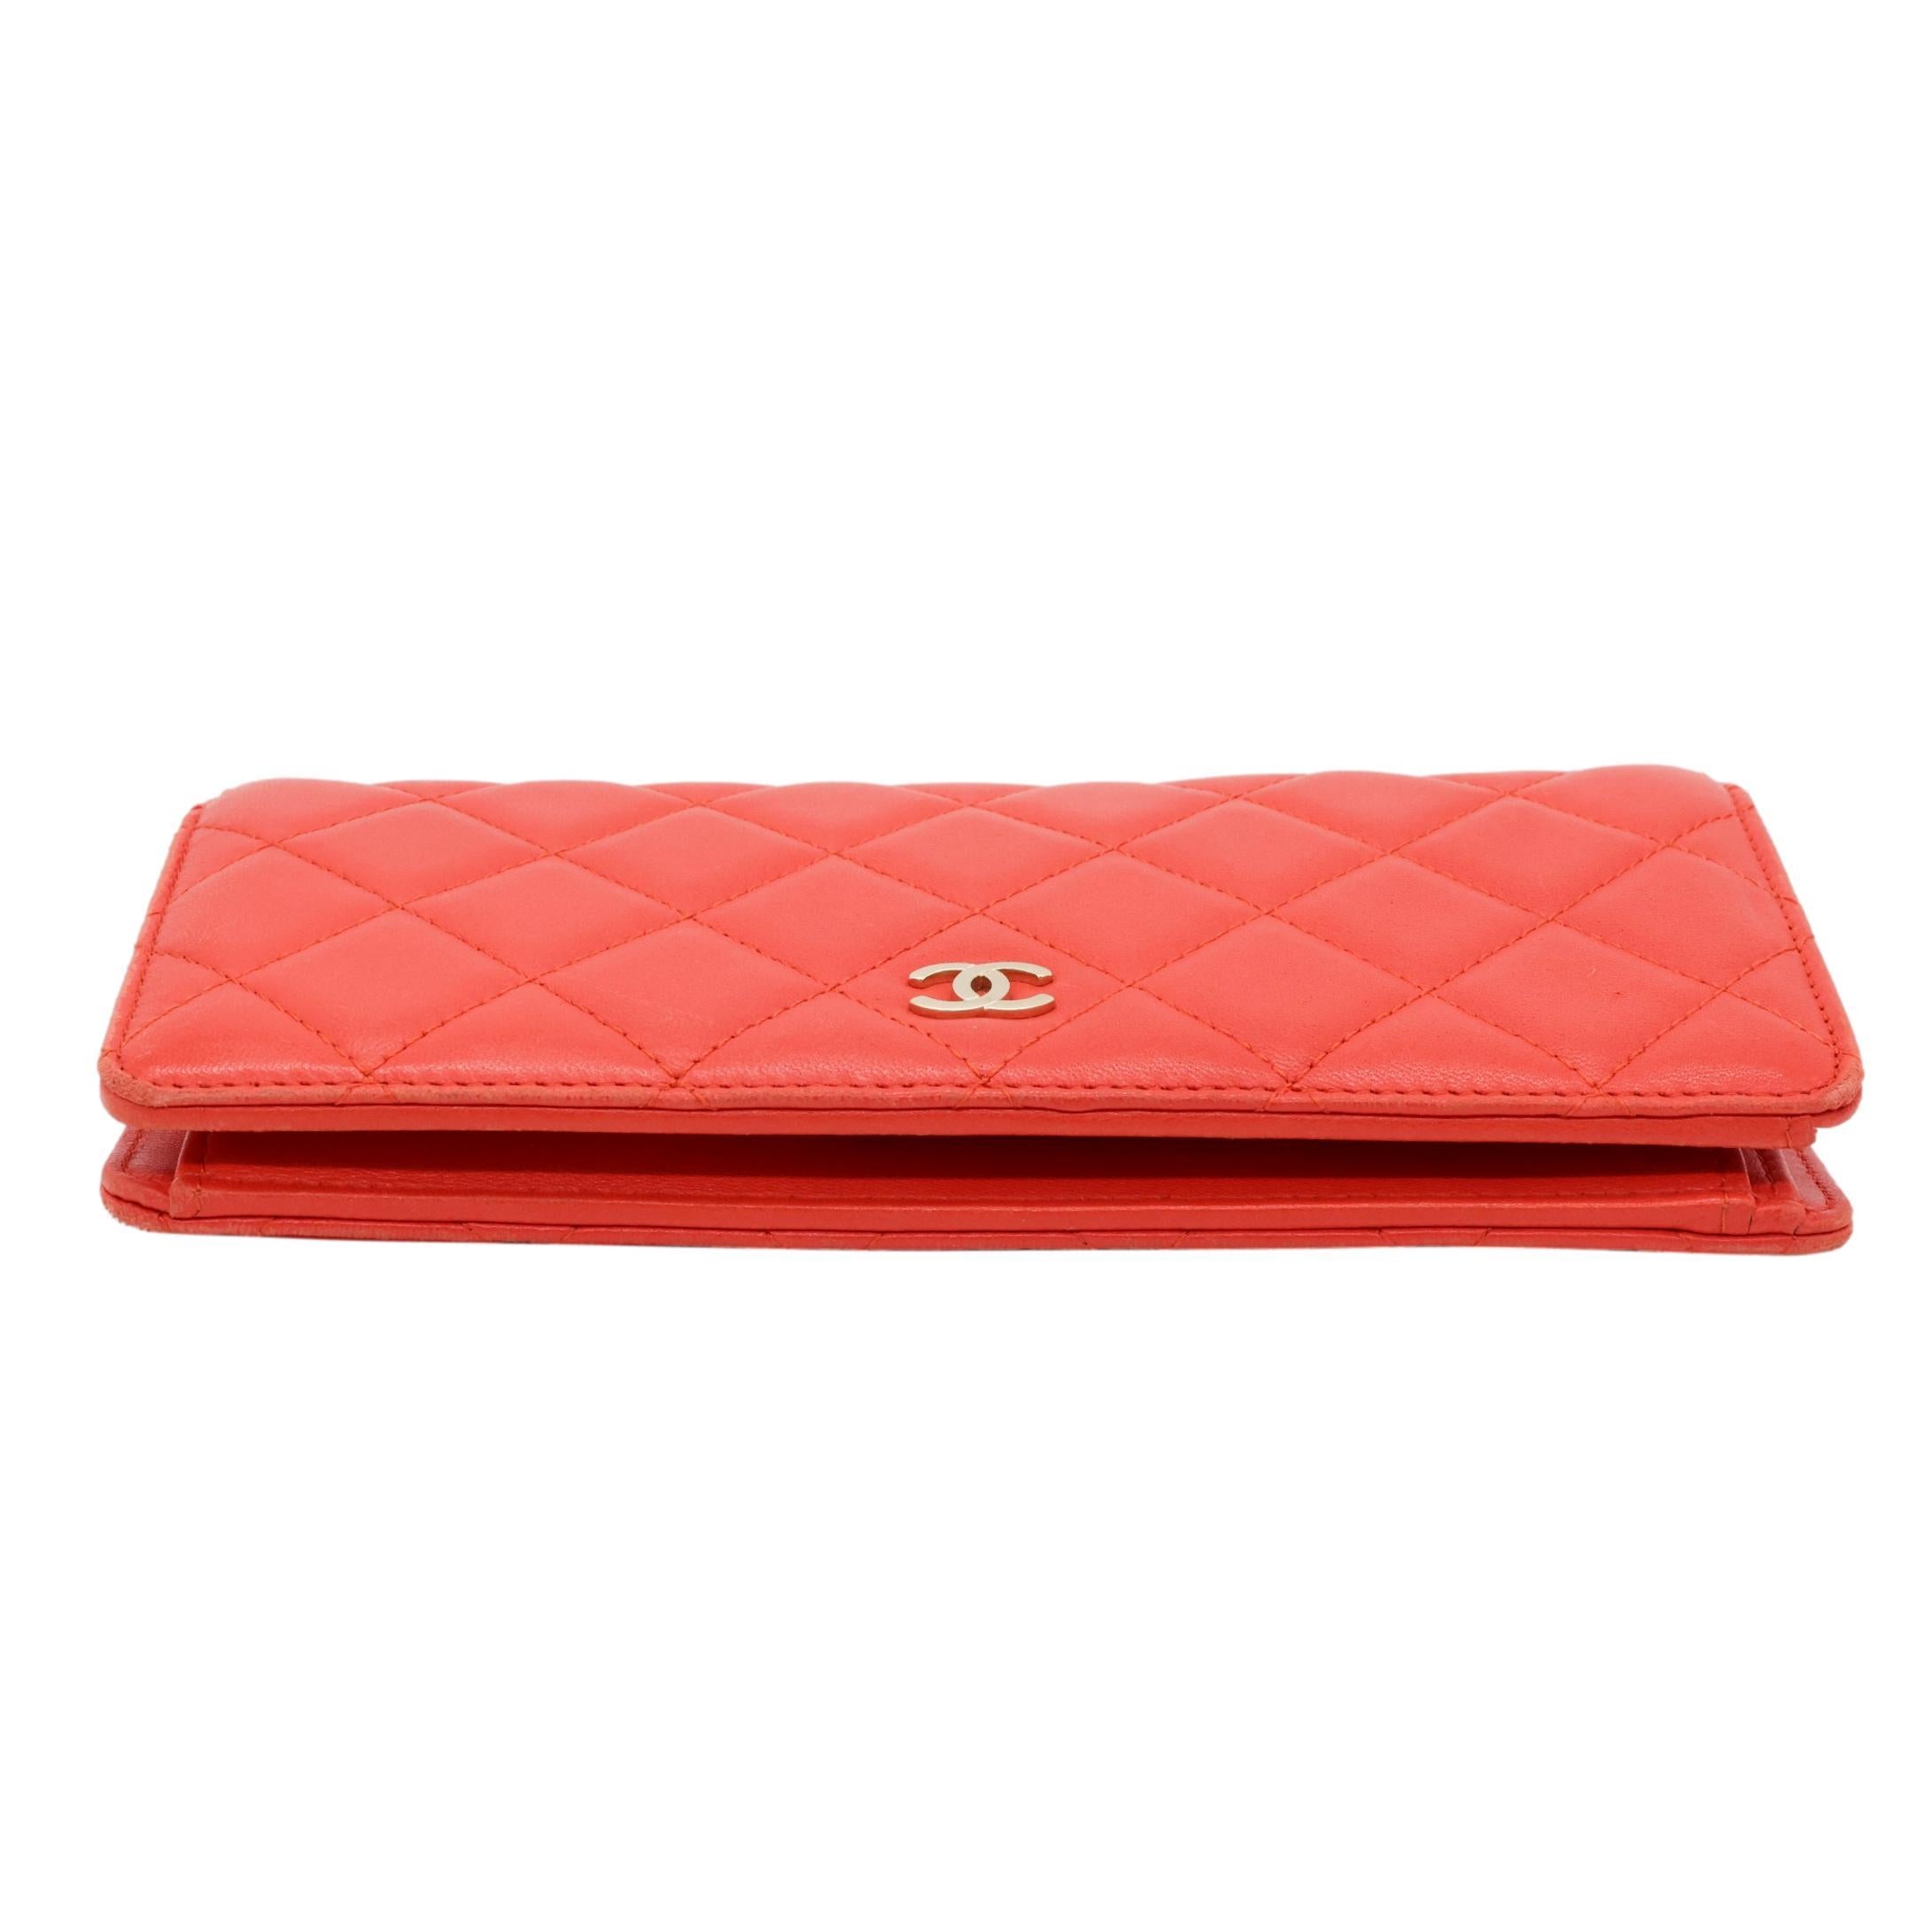 Red Chanel Quilted Coral Lambskin Leather Yen Continental Wallet, 2009 - 2010.